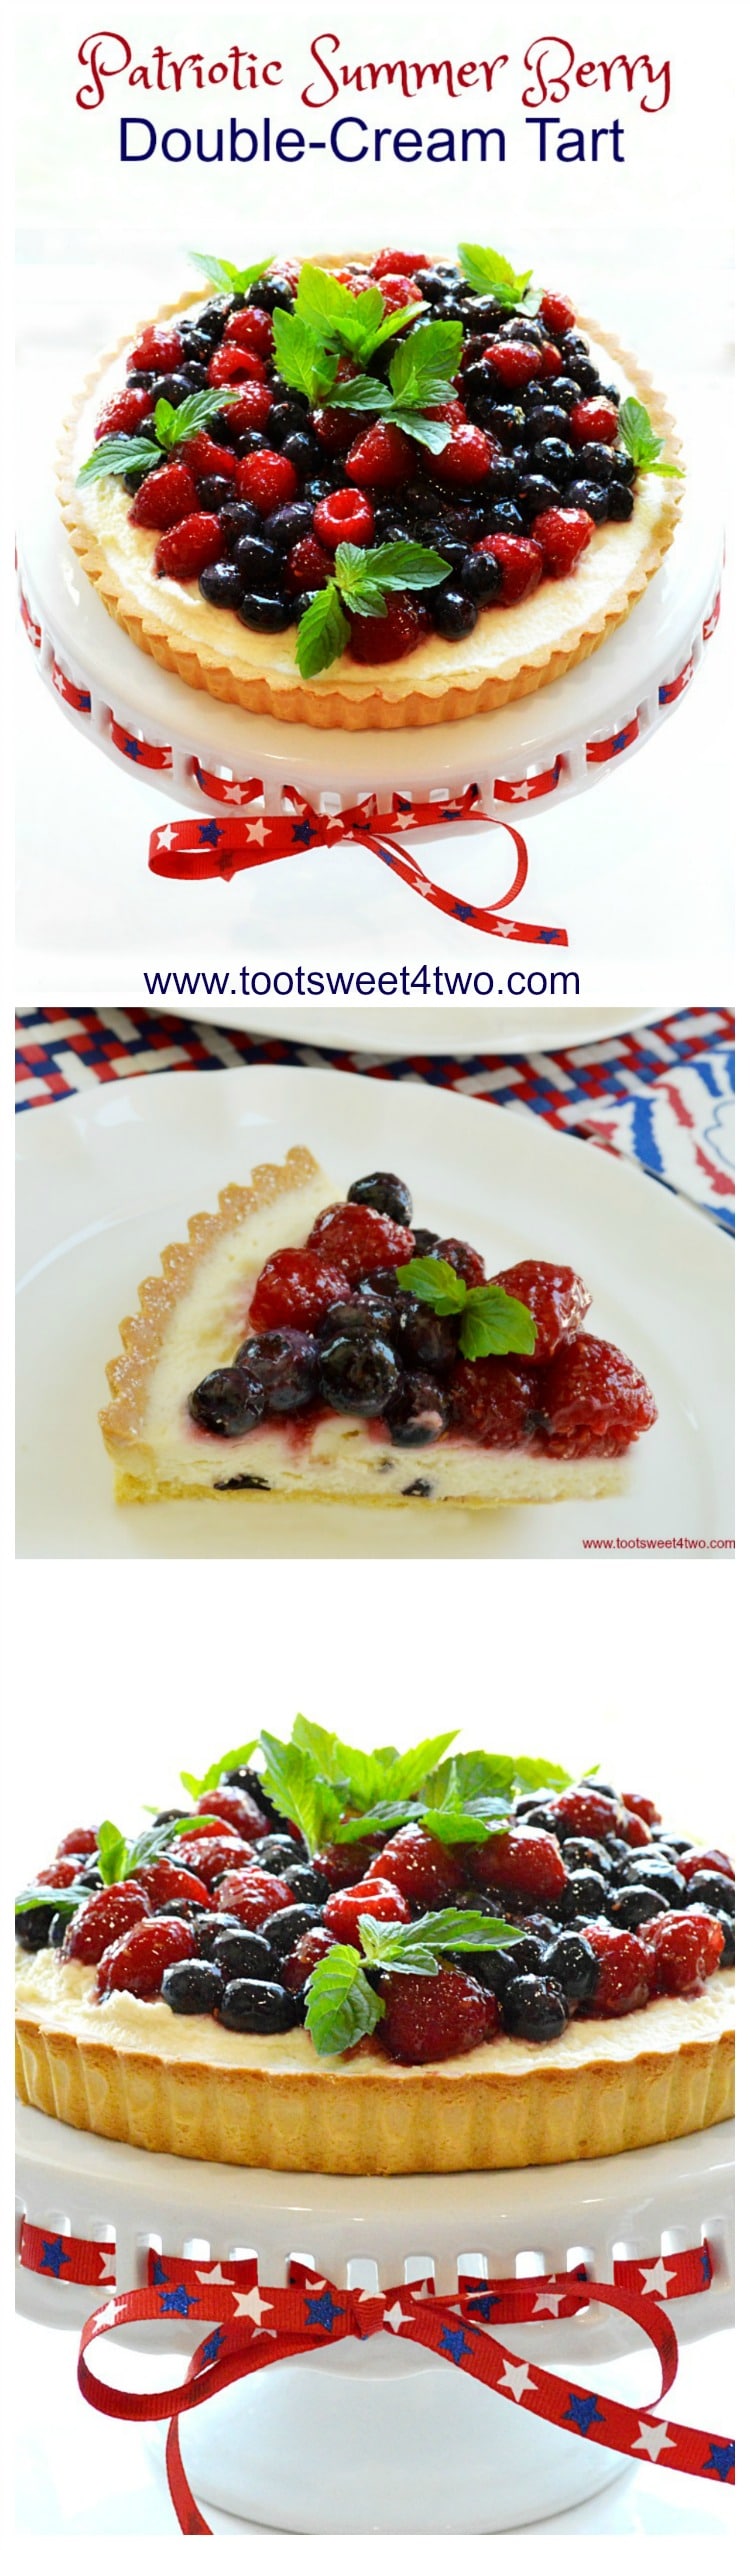 An easy, no-bake dessert, Patriotic Summer Berry Double-Cream Tart is a winning recipe to celebrate 4th of July or any red, white and blue holiday. A flaky, store-bought sweet pastry tart shell covered with a sweet double-cream filling and topped with fresh fruit, makes a beautiful and delicious treat for Independence Day! | www.tootsweet4two.com